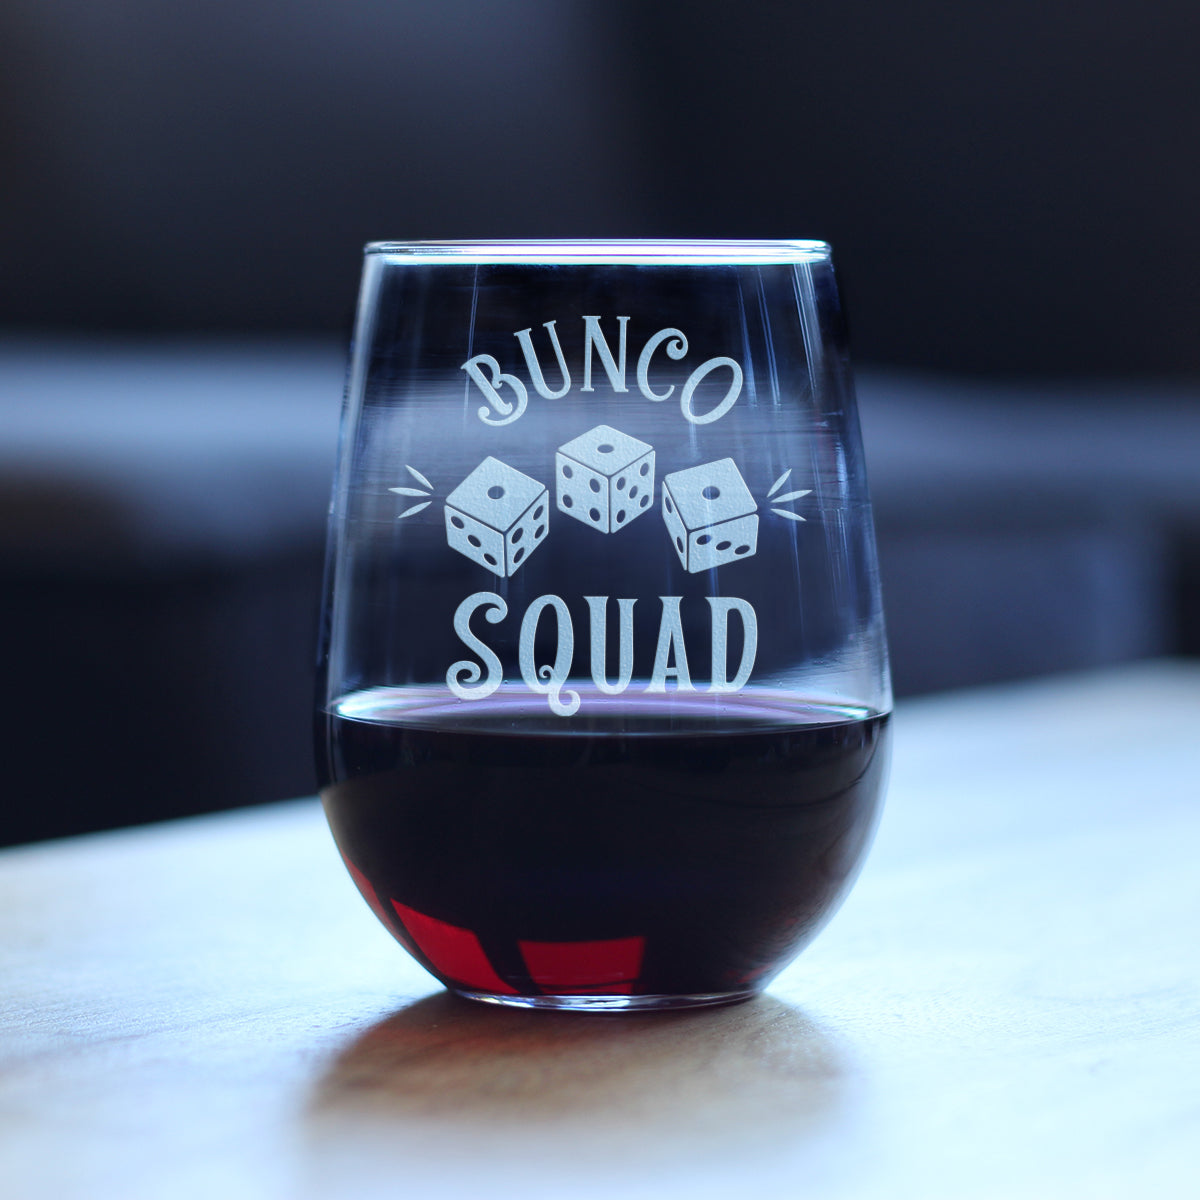 Bunco Squad Stemless Wine Glass - Bunco Decor and Bunco Gifts for Women - Large 17 Oz Glasses